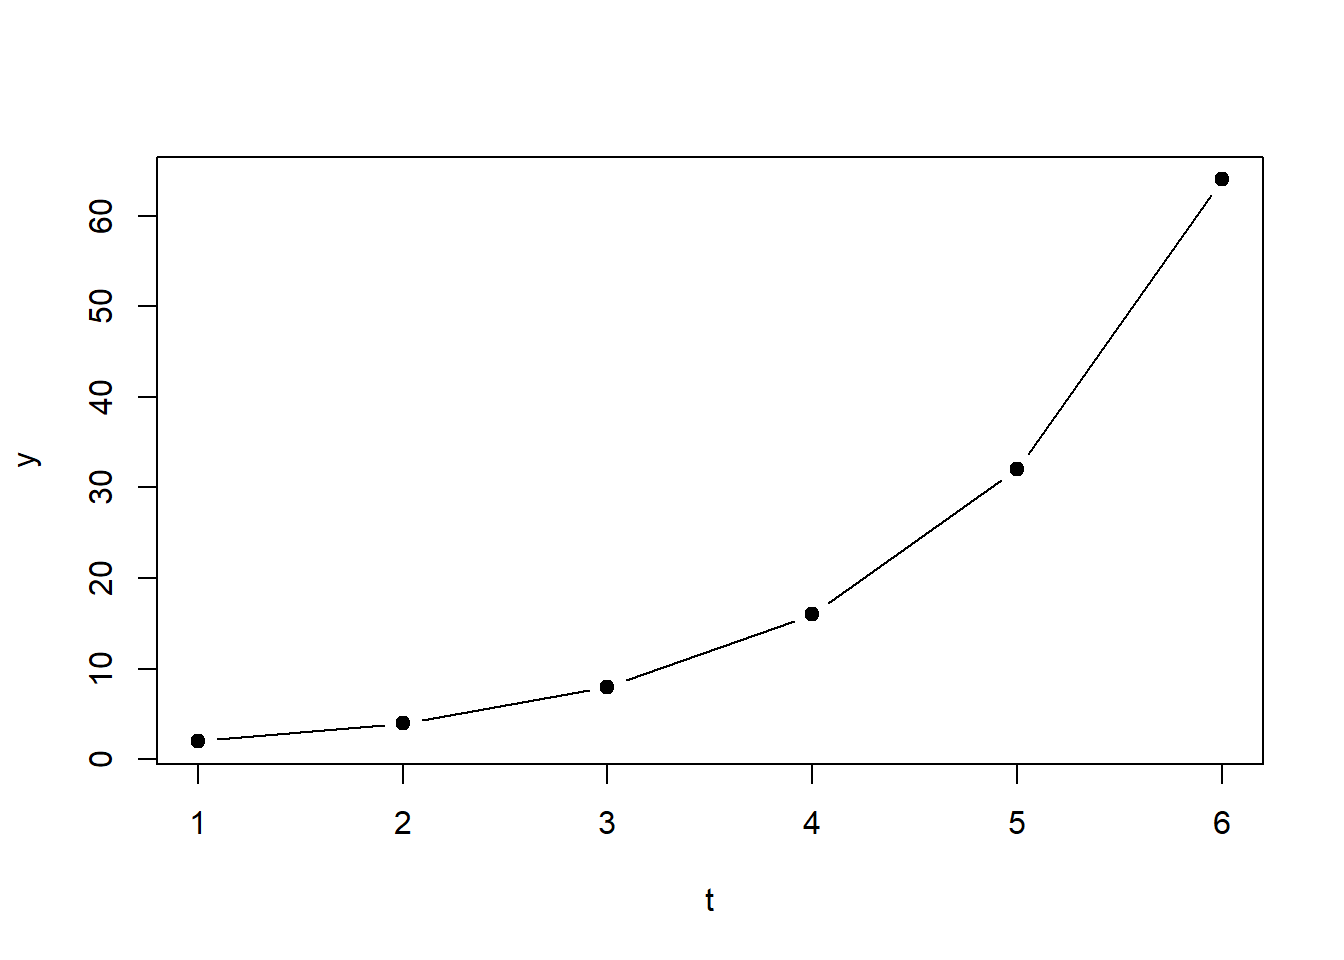 Left: Plot of Equation 2.1. Right: Plot of Equation 2.1 on logarithmic scale.